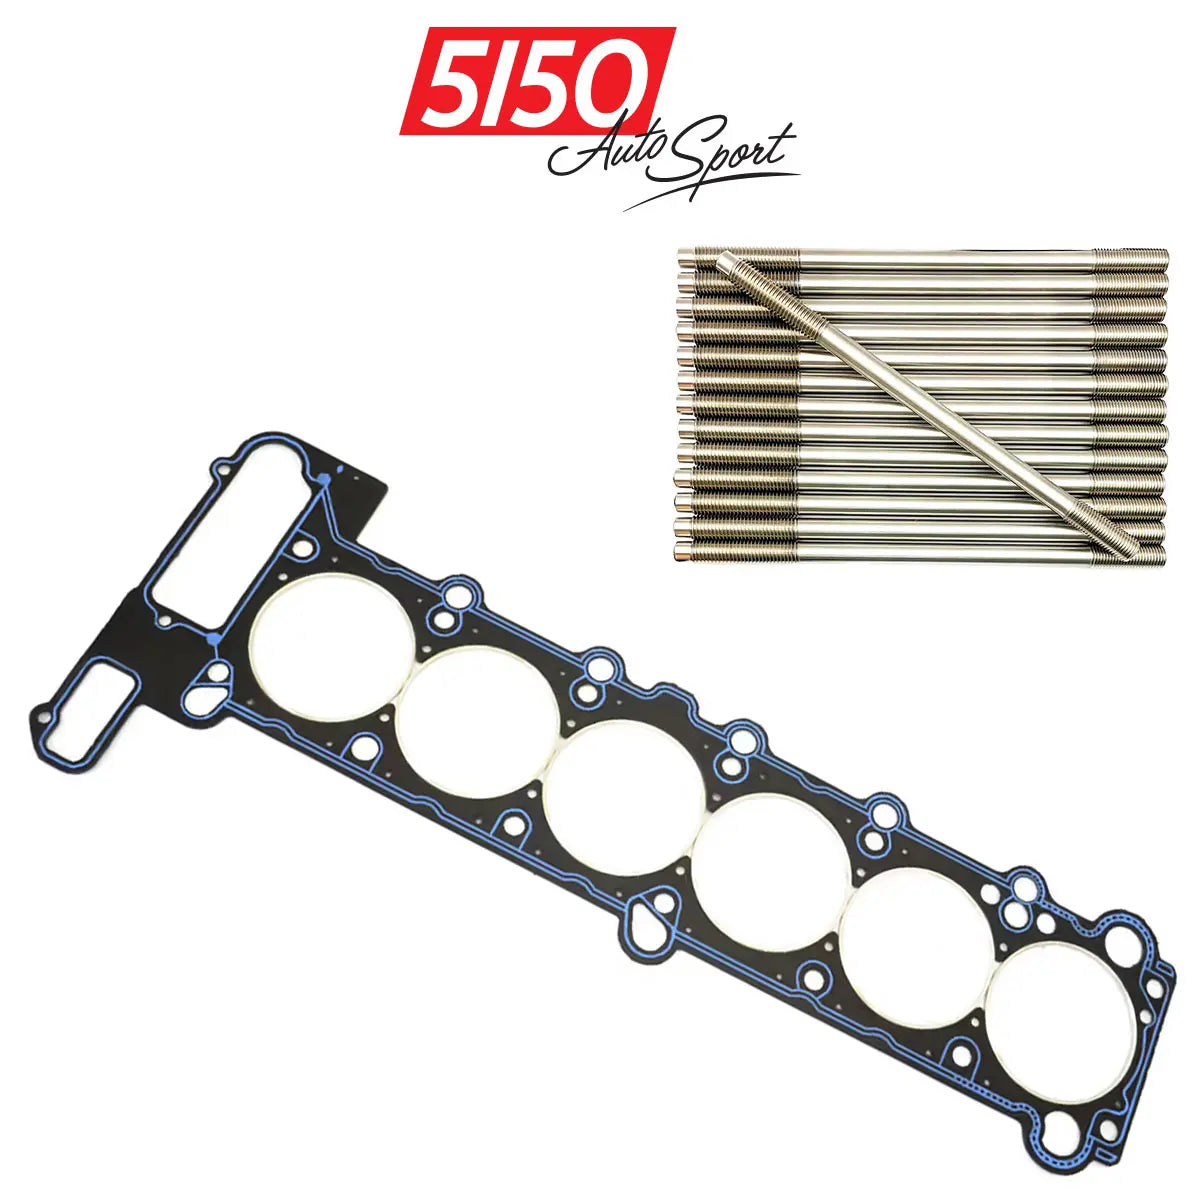 BMW E36 Cutting Ring Head Gasket and ARP 625+ Head Stud Kit for M50 M52 S50 S52 Engines